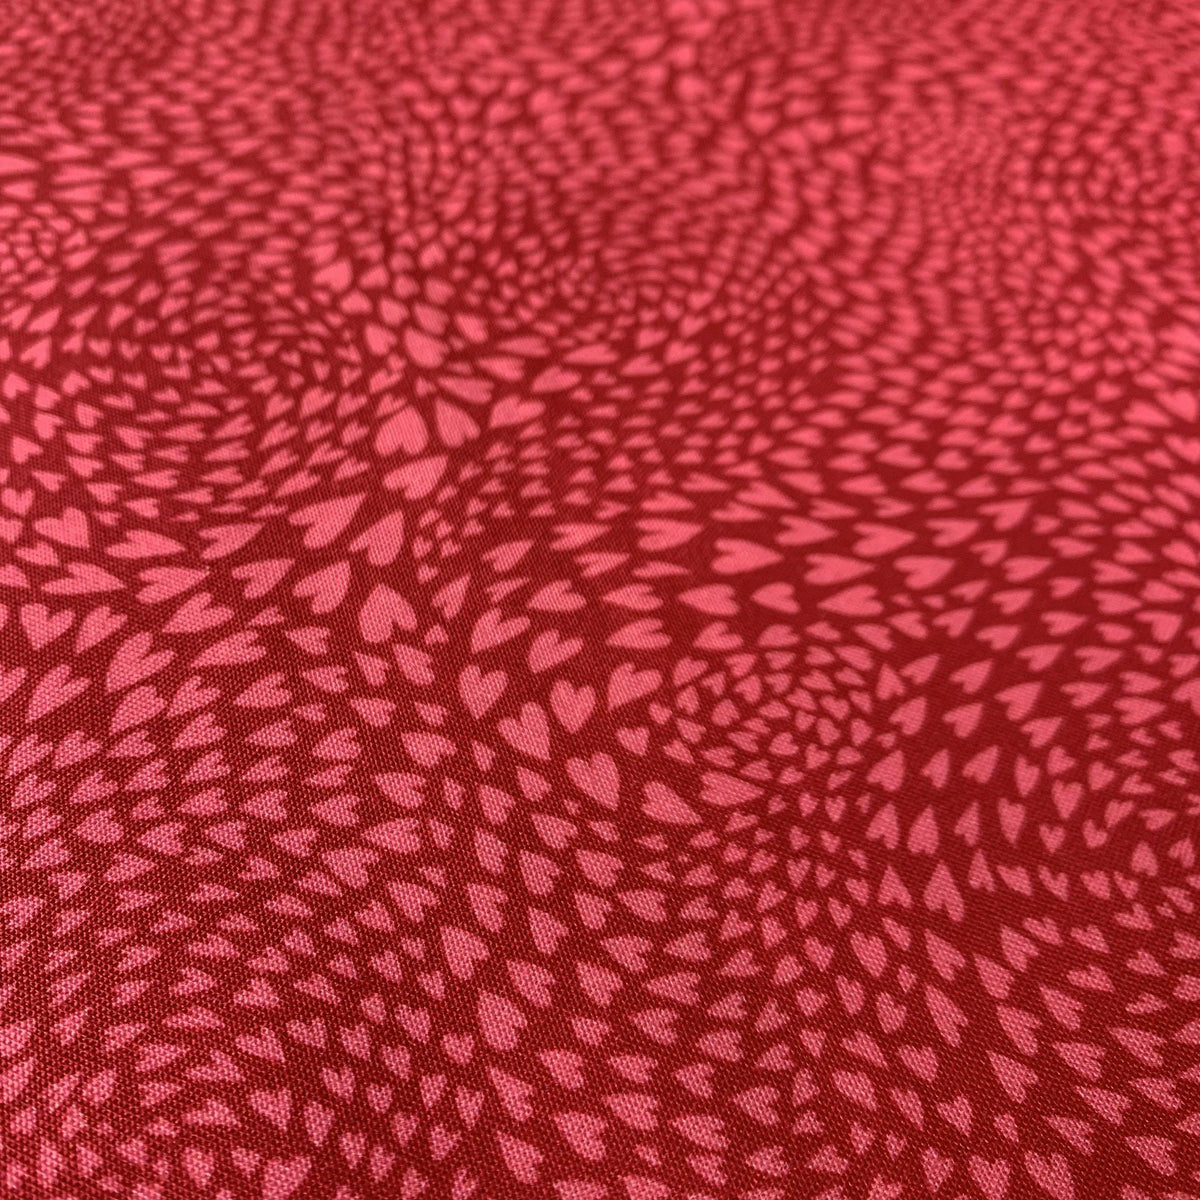 Swirl of Hearts / Red